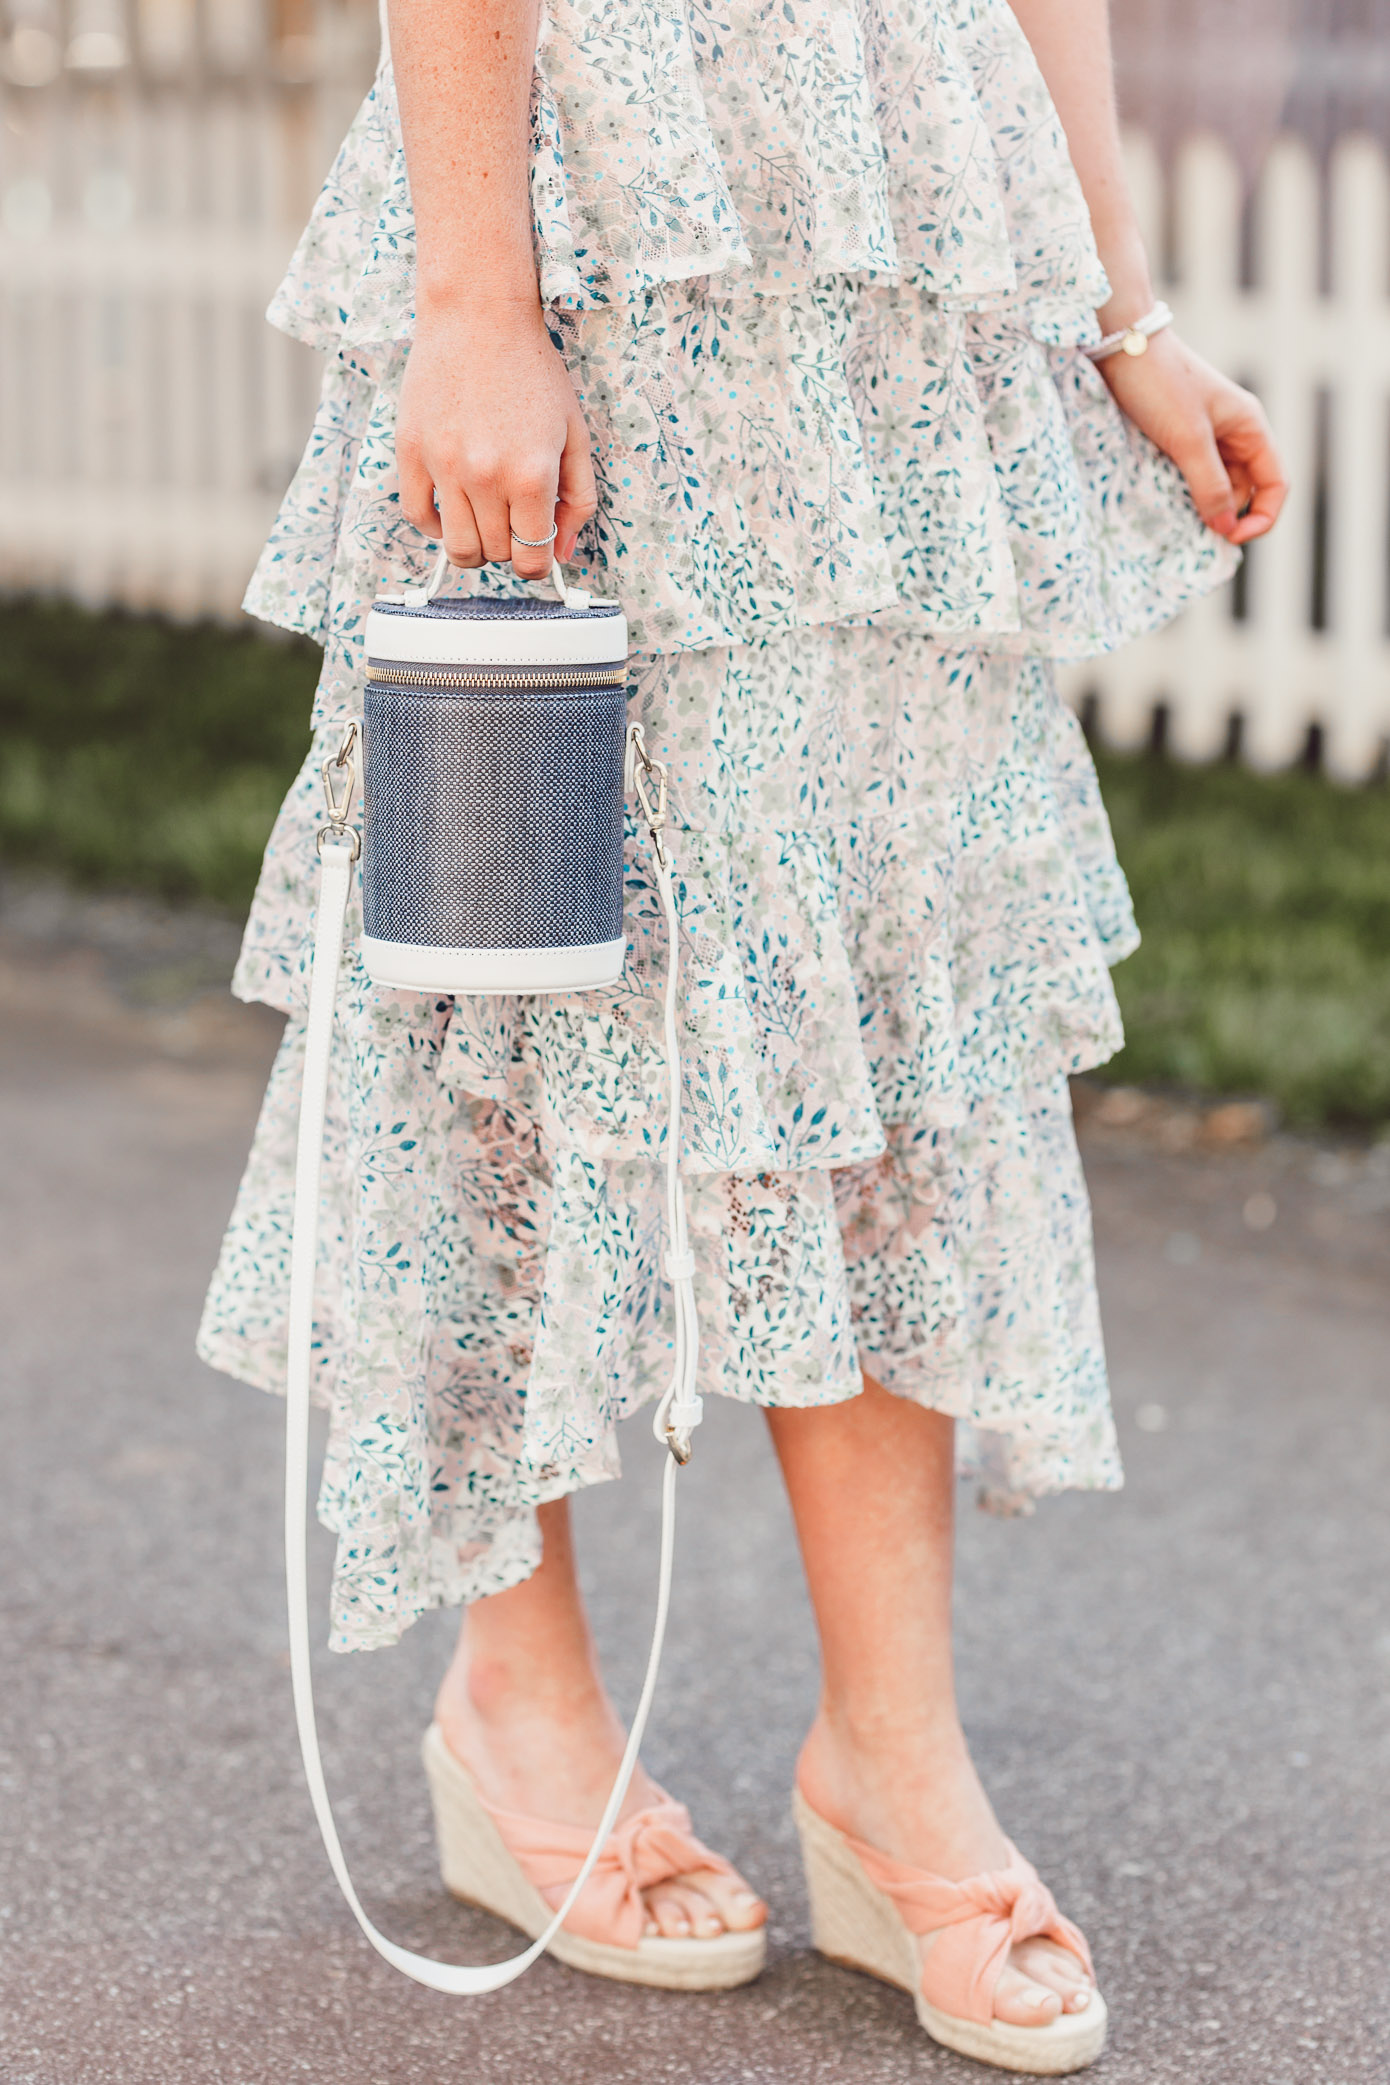 Floral Ruffle Midi Skirt, Rosé graphic tee | ft. Chicwish, Soludos, Paravel | Louella Reese #summerstyle #midiskirt #femininestyle #chicwish #soludos